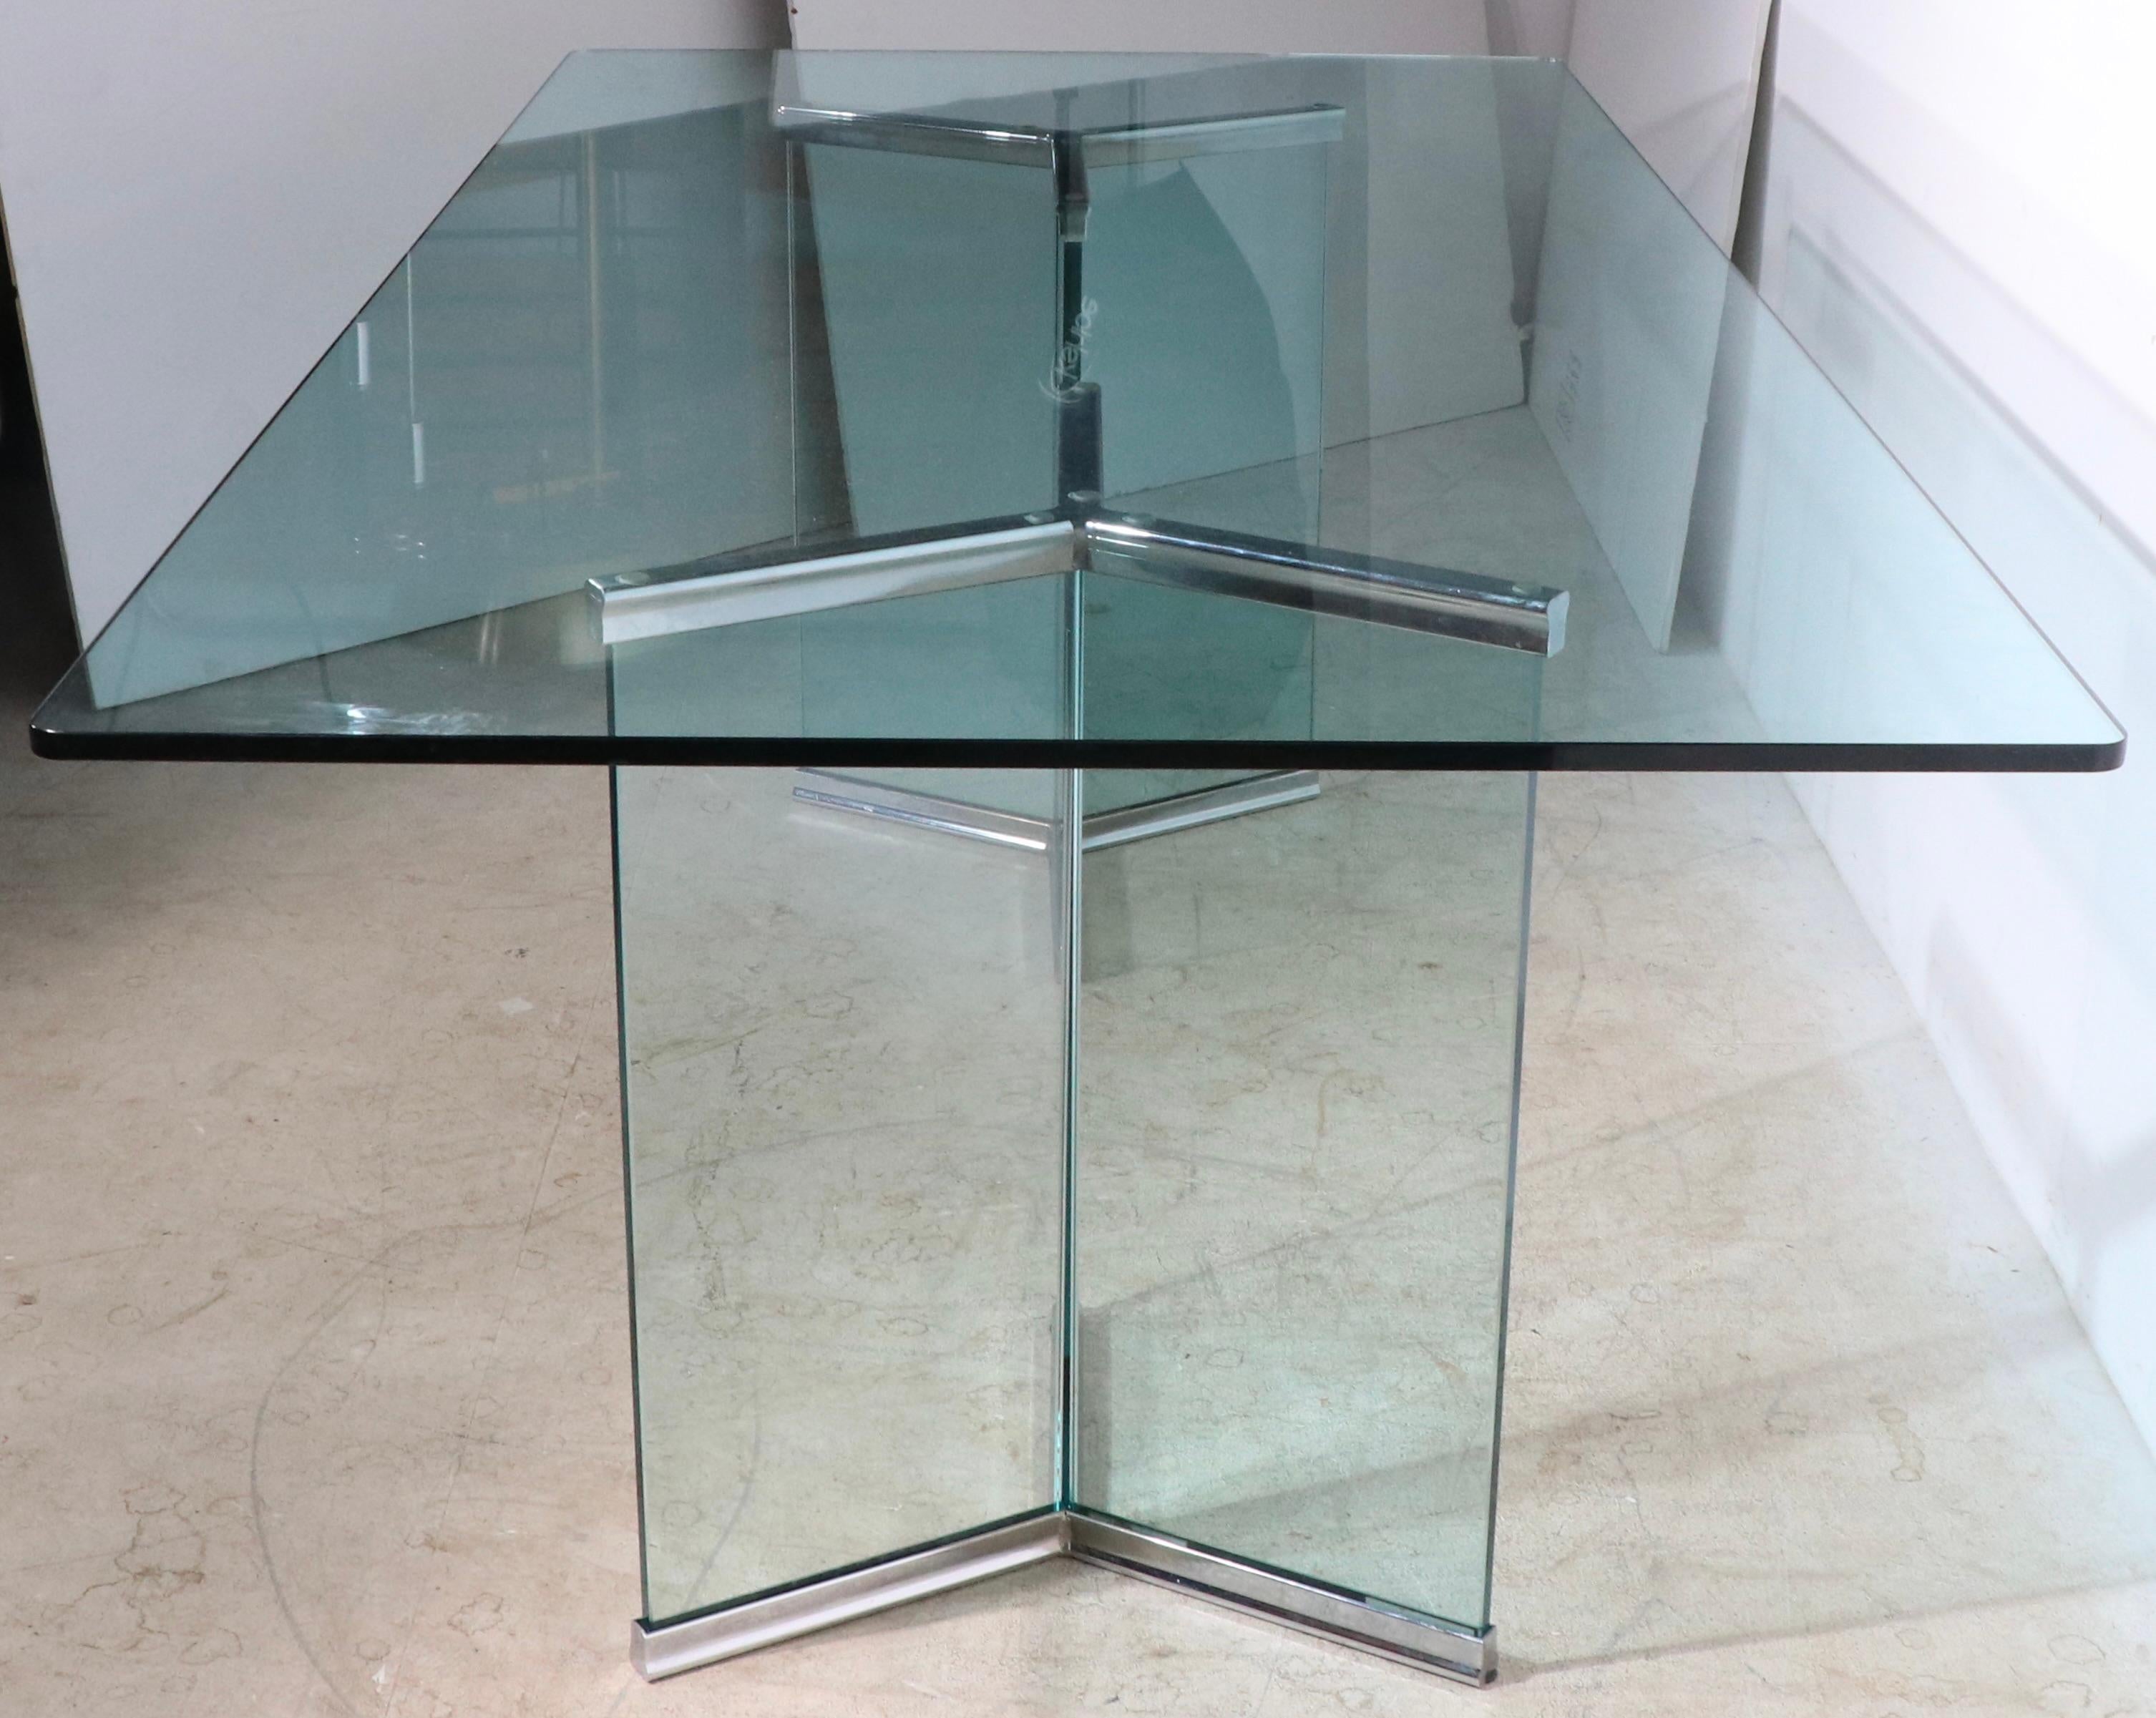 Late 20th Century Glass on Glass Dining Table by Irving Rosen for The Pace Collection, C. 1970's